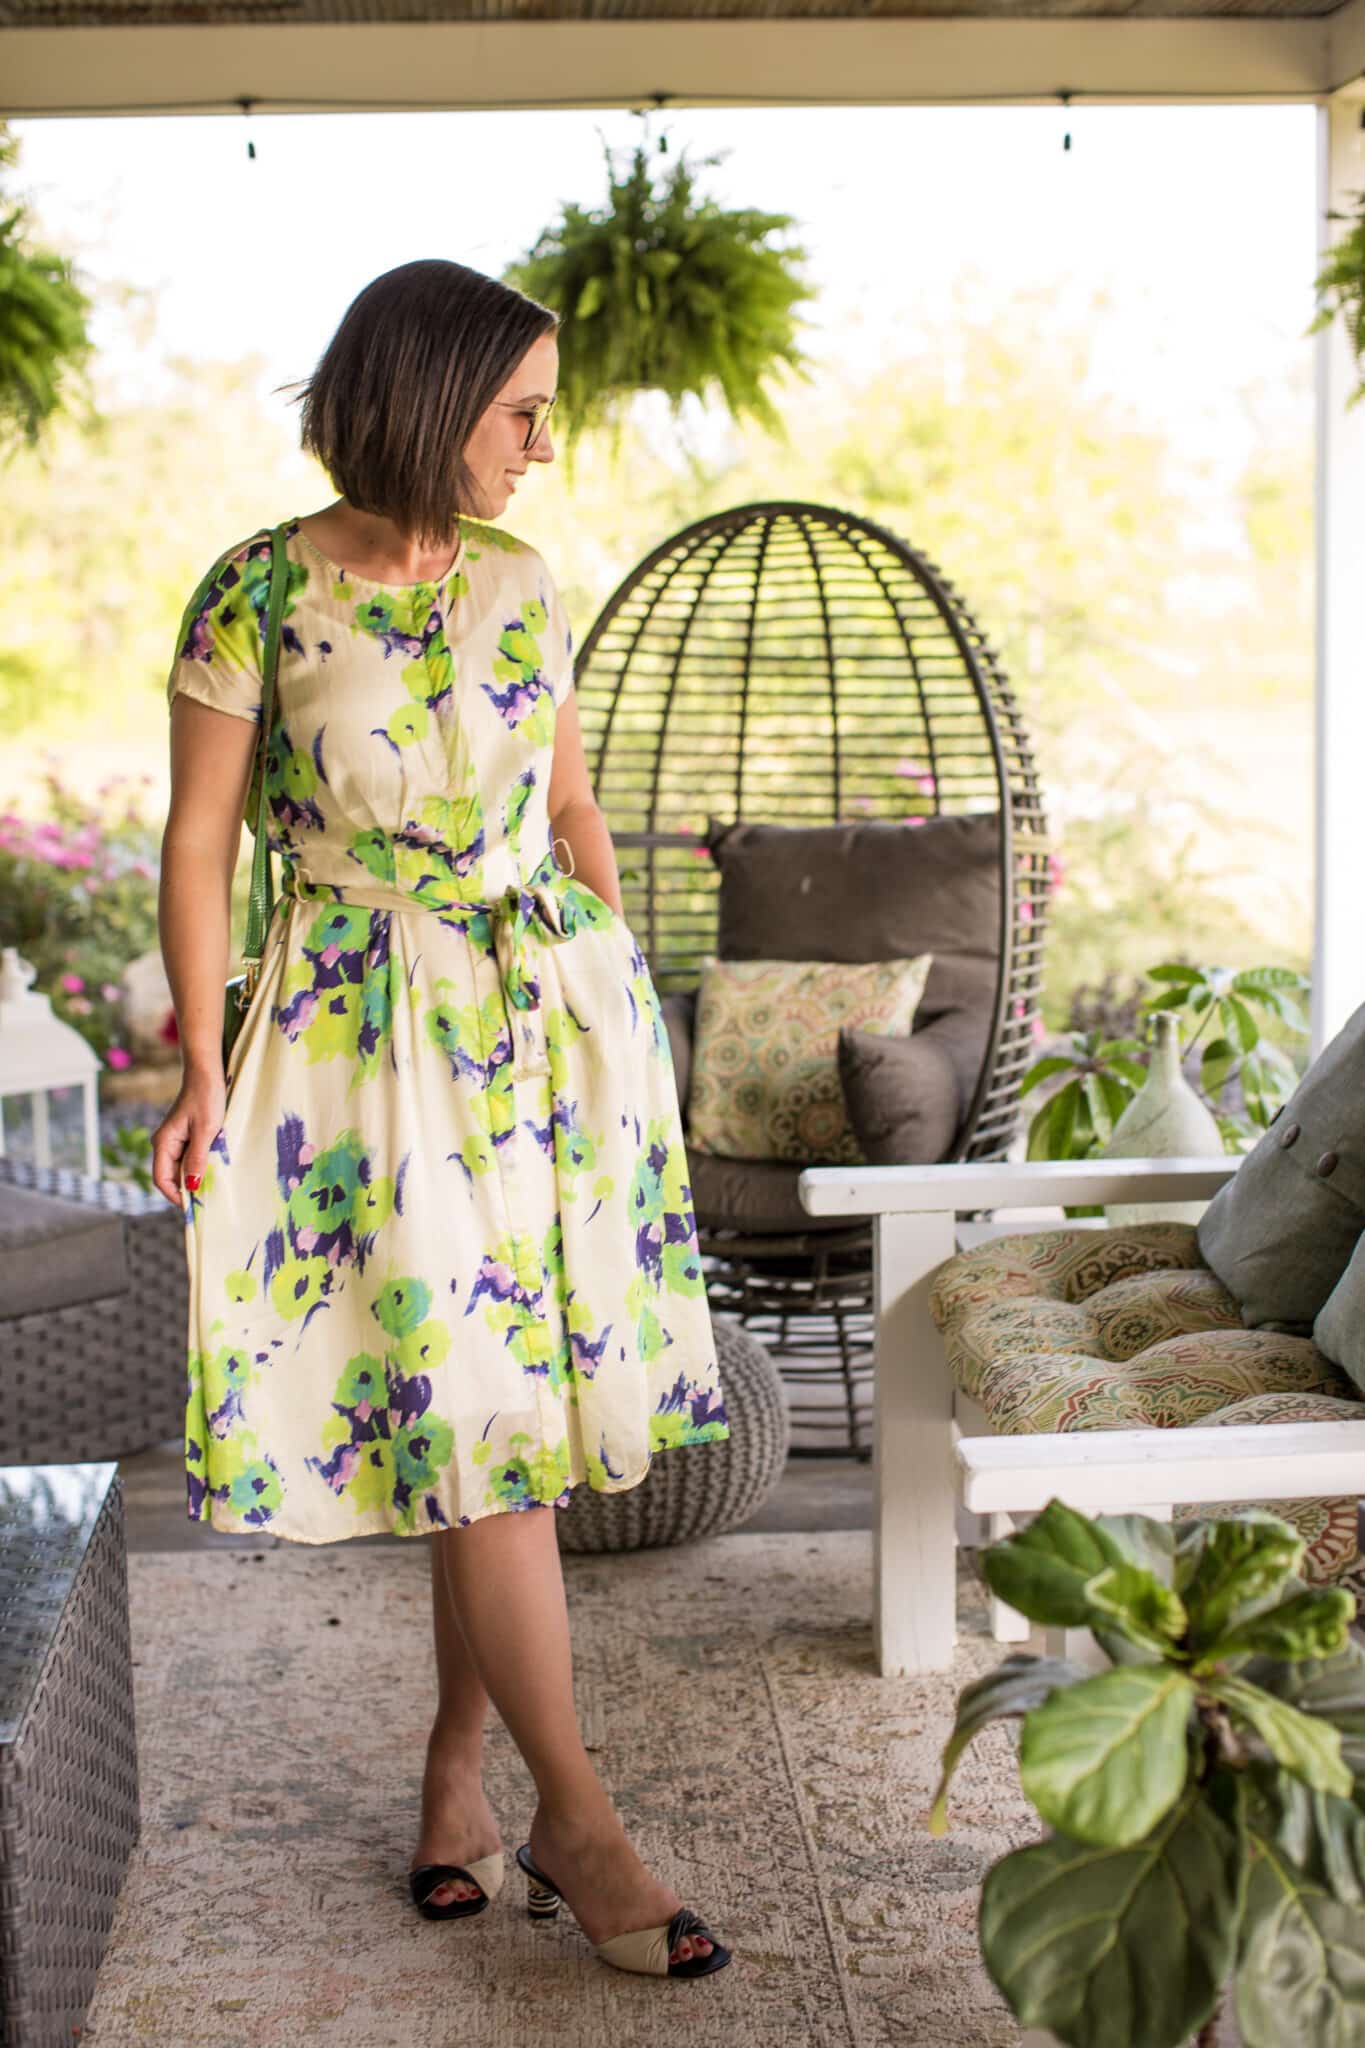 Lindsey wears the Anna Slope Arm Dress in Tuileries Oyster Green on a summer patio